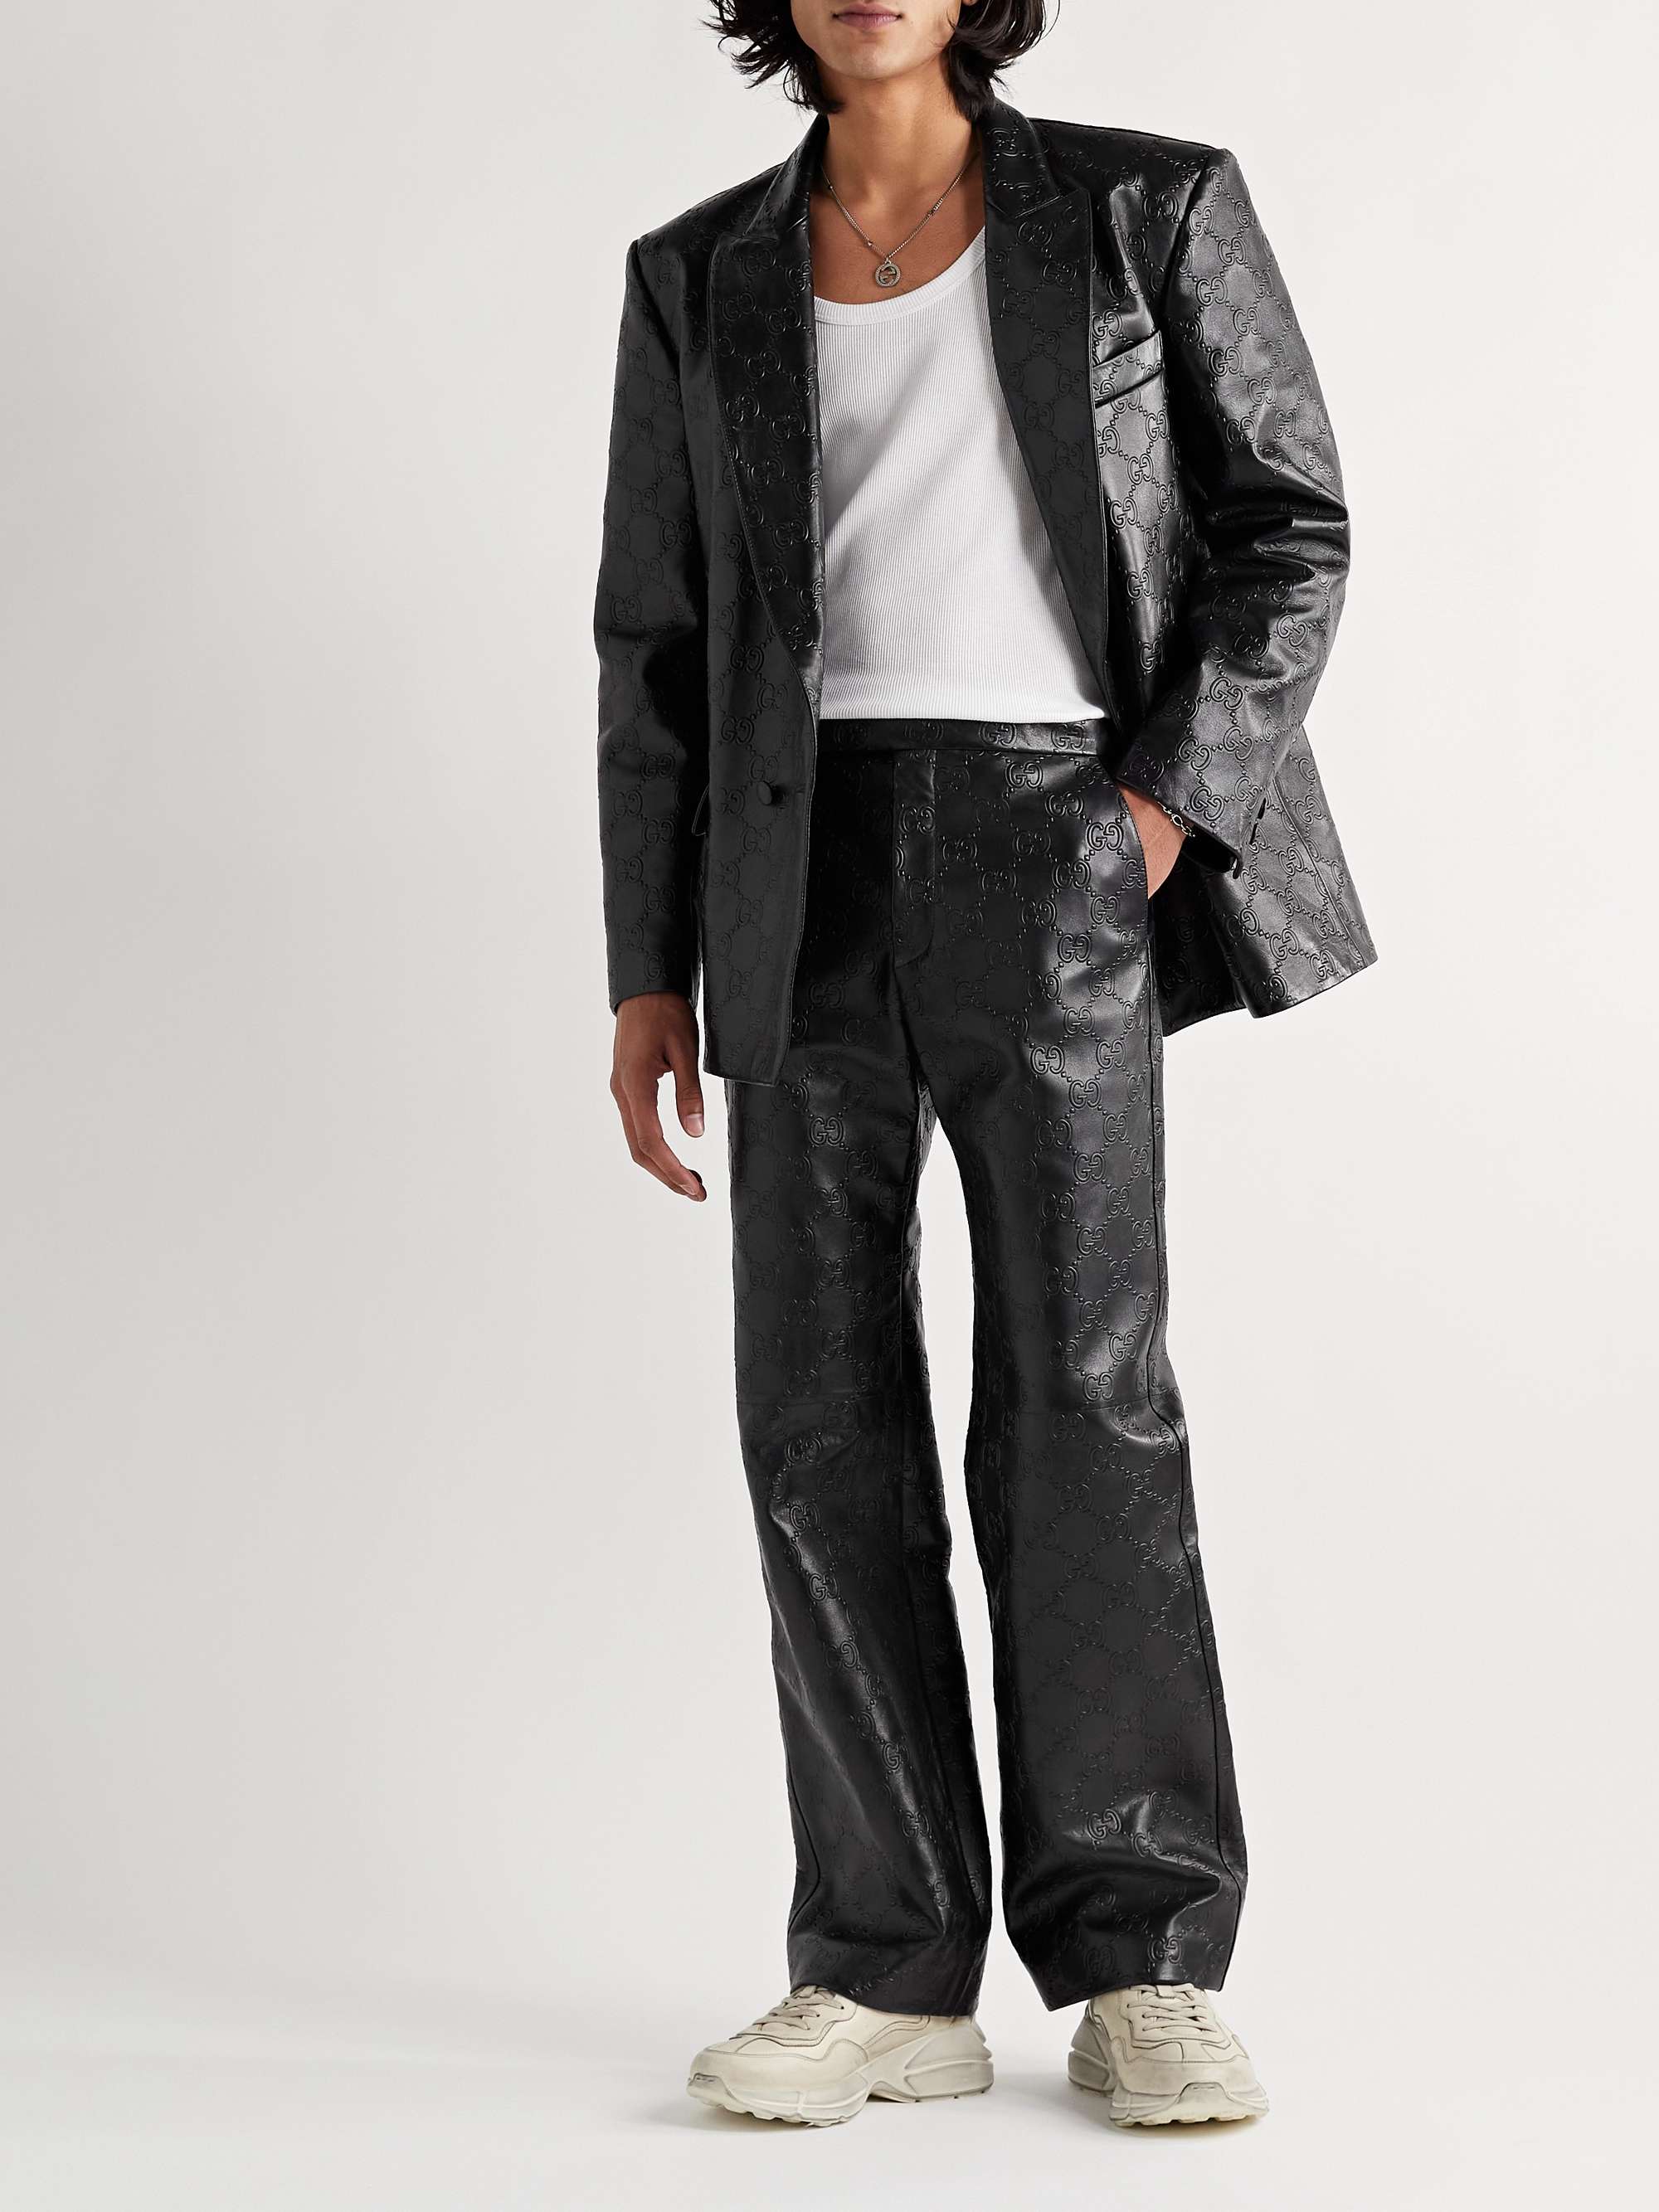 GUCCI Pants Men  Shiny leather trousers Black  GUCCI 713487 XNATL1000   Leam Luxury Shopping Online